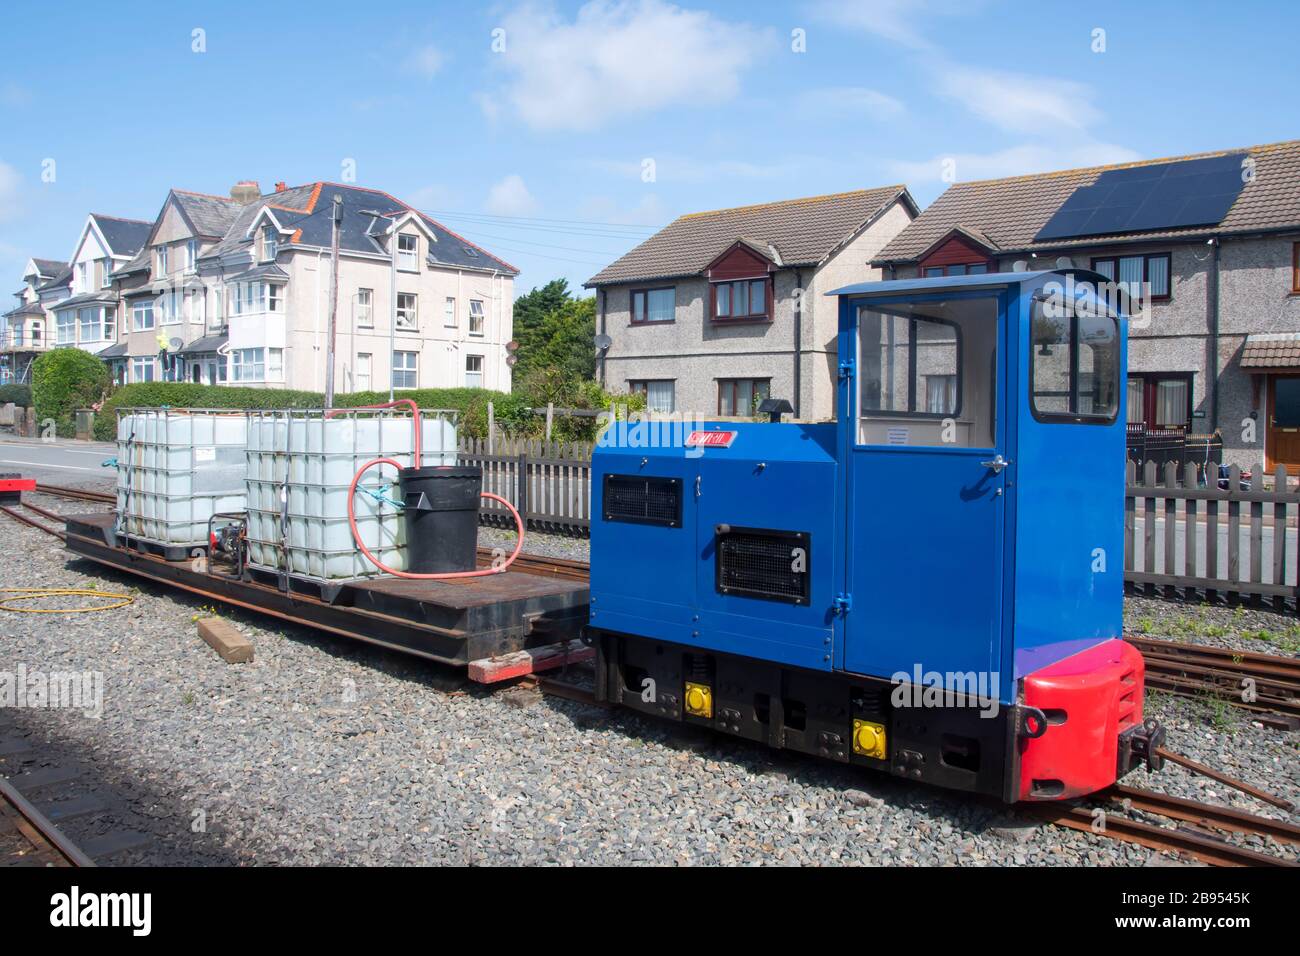 ‘Gwril’, HE 9354, Jenbach Type DH25 diesel engine, at Fairbourne station, near Barmouth, Gwynedd, Wales. Built in 1994 by Hunslet Stock Photo